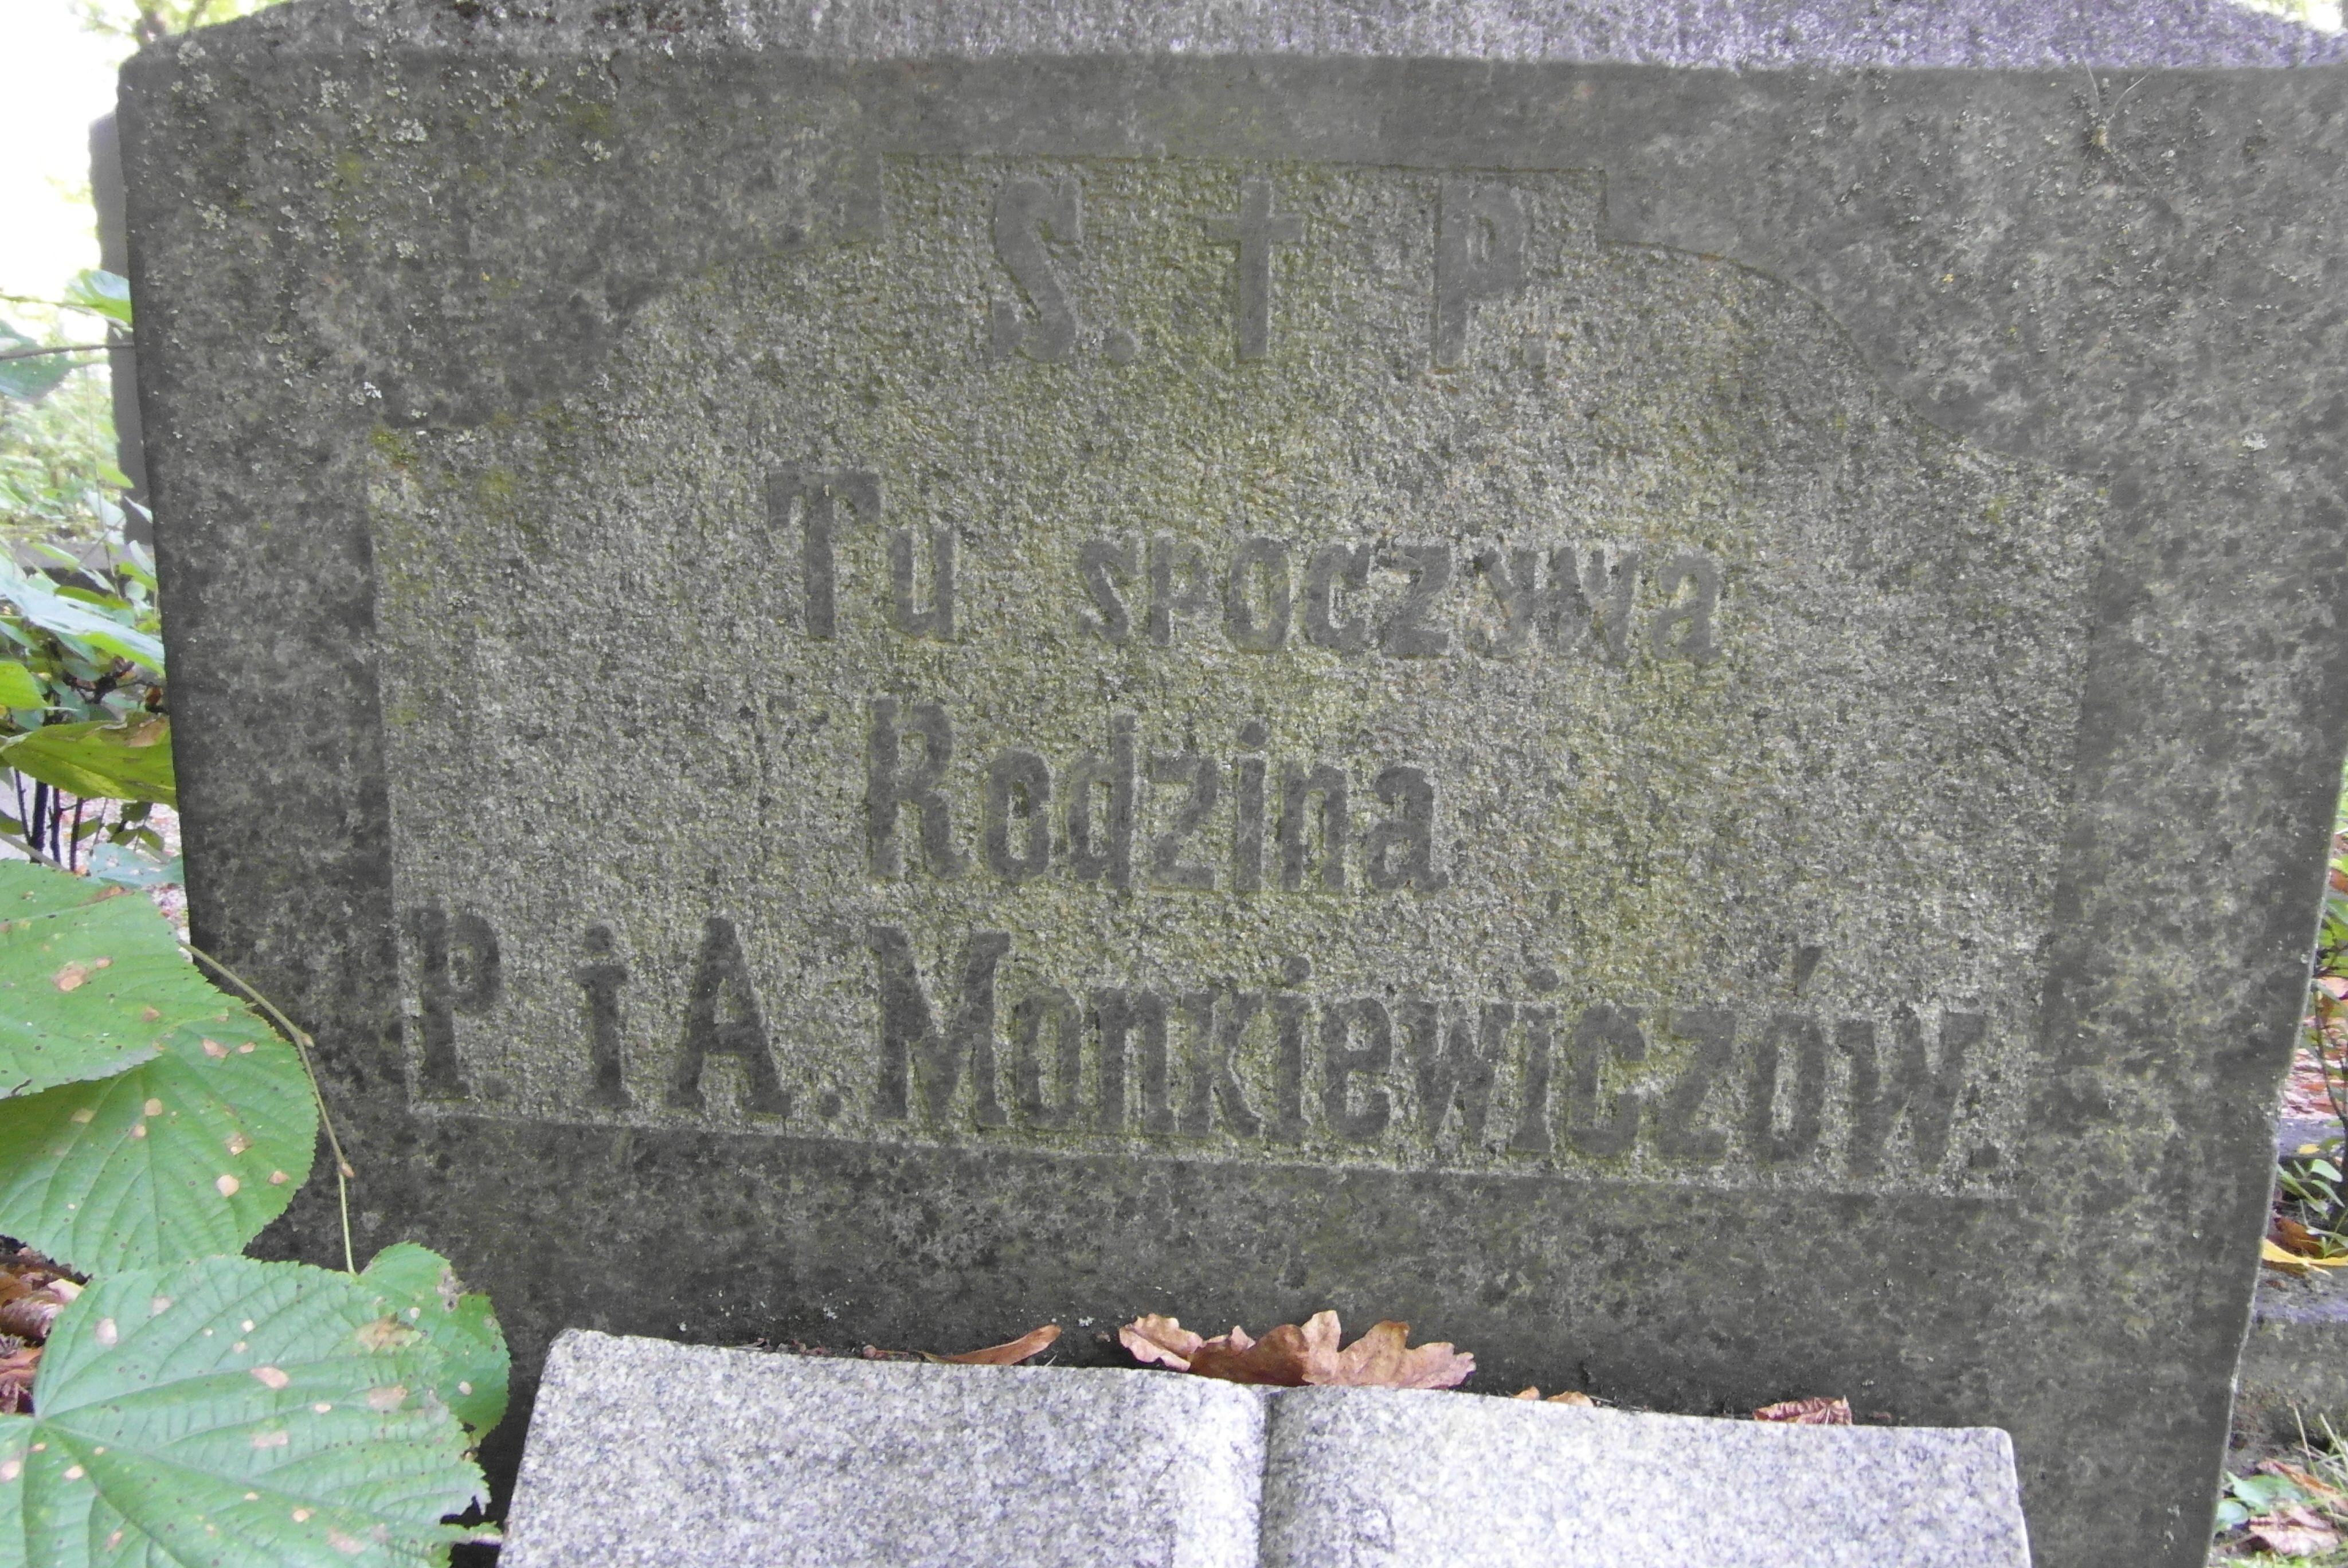 Inscription from the tombstone of the Monkievich family, St Michael's cemetery in Riga, as of 2021.